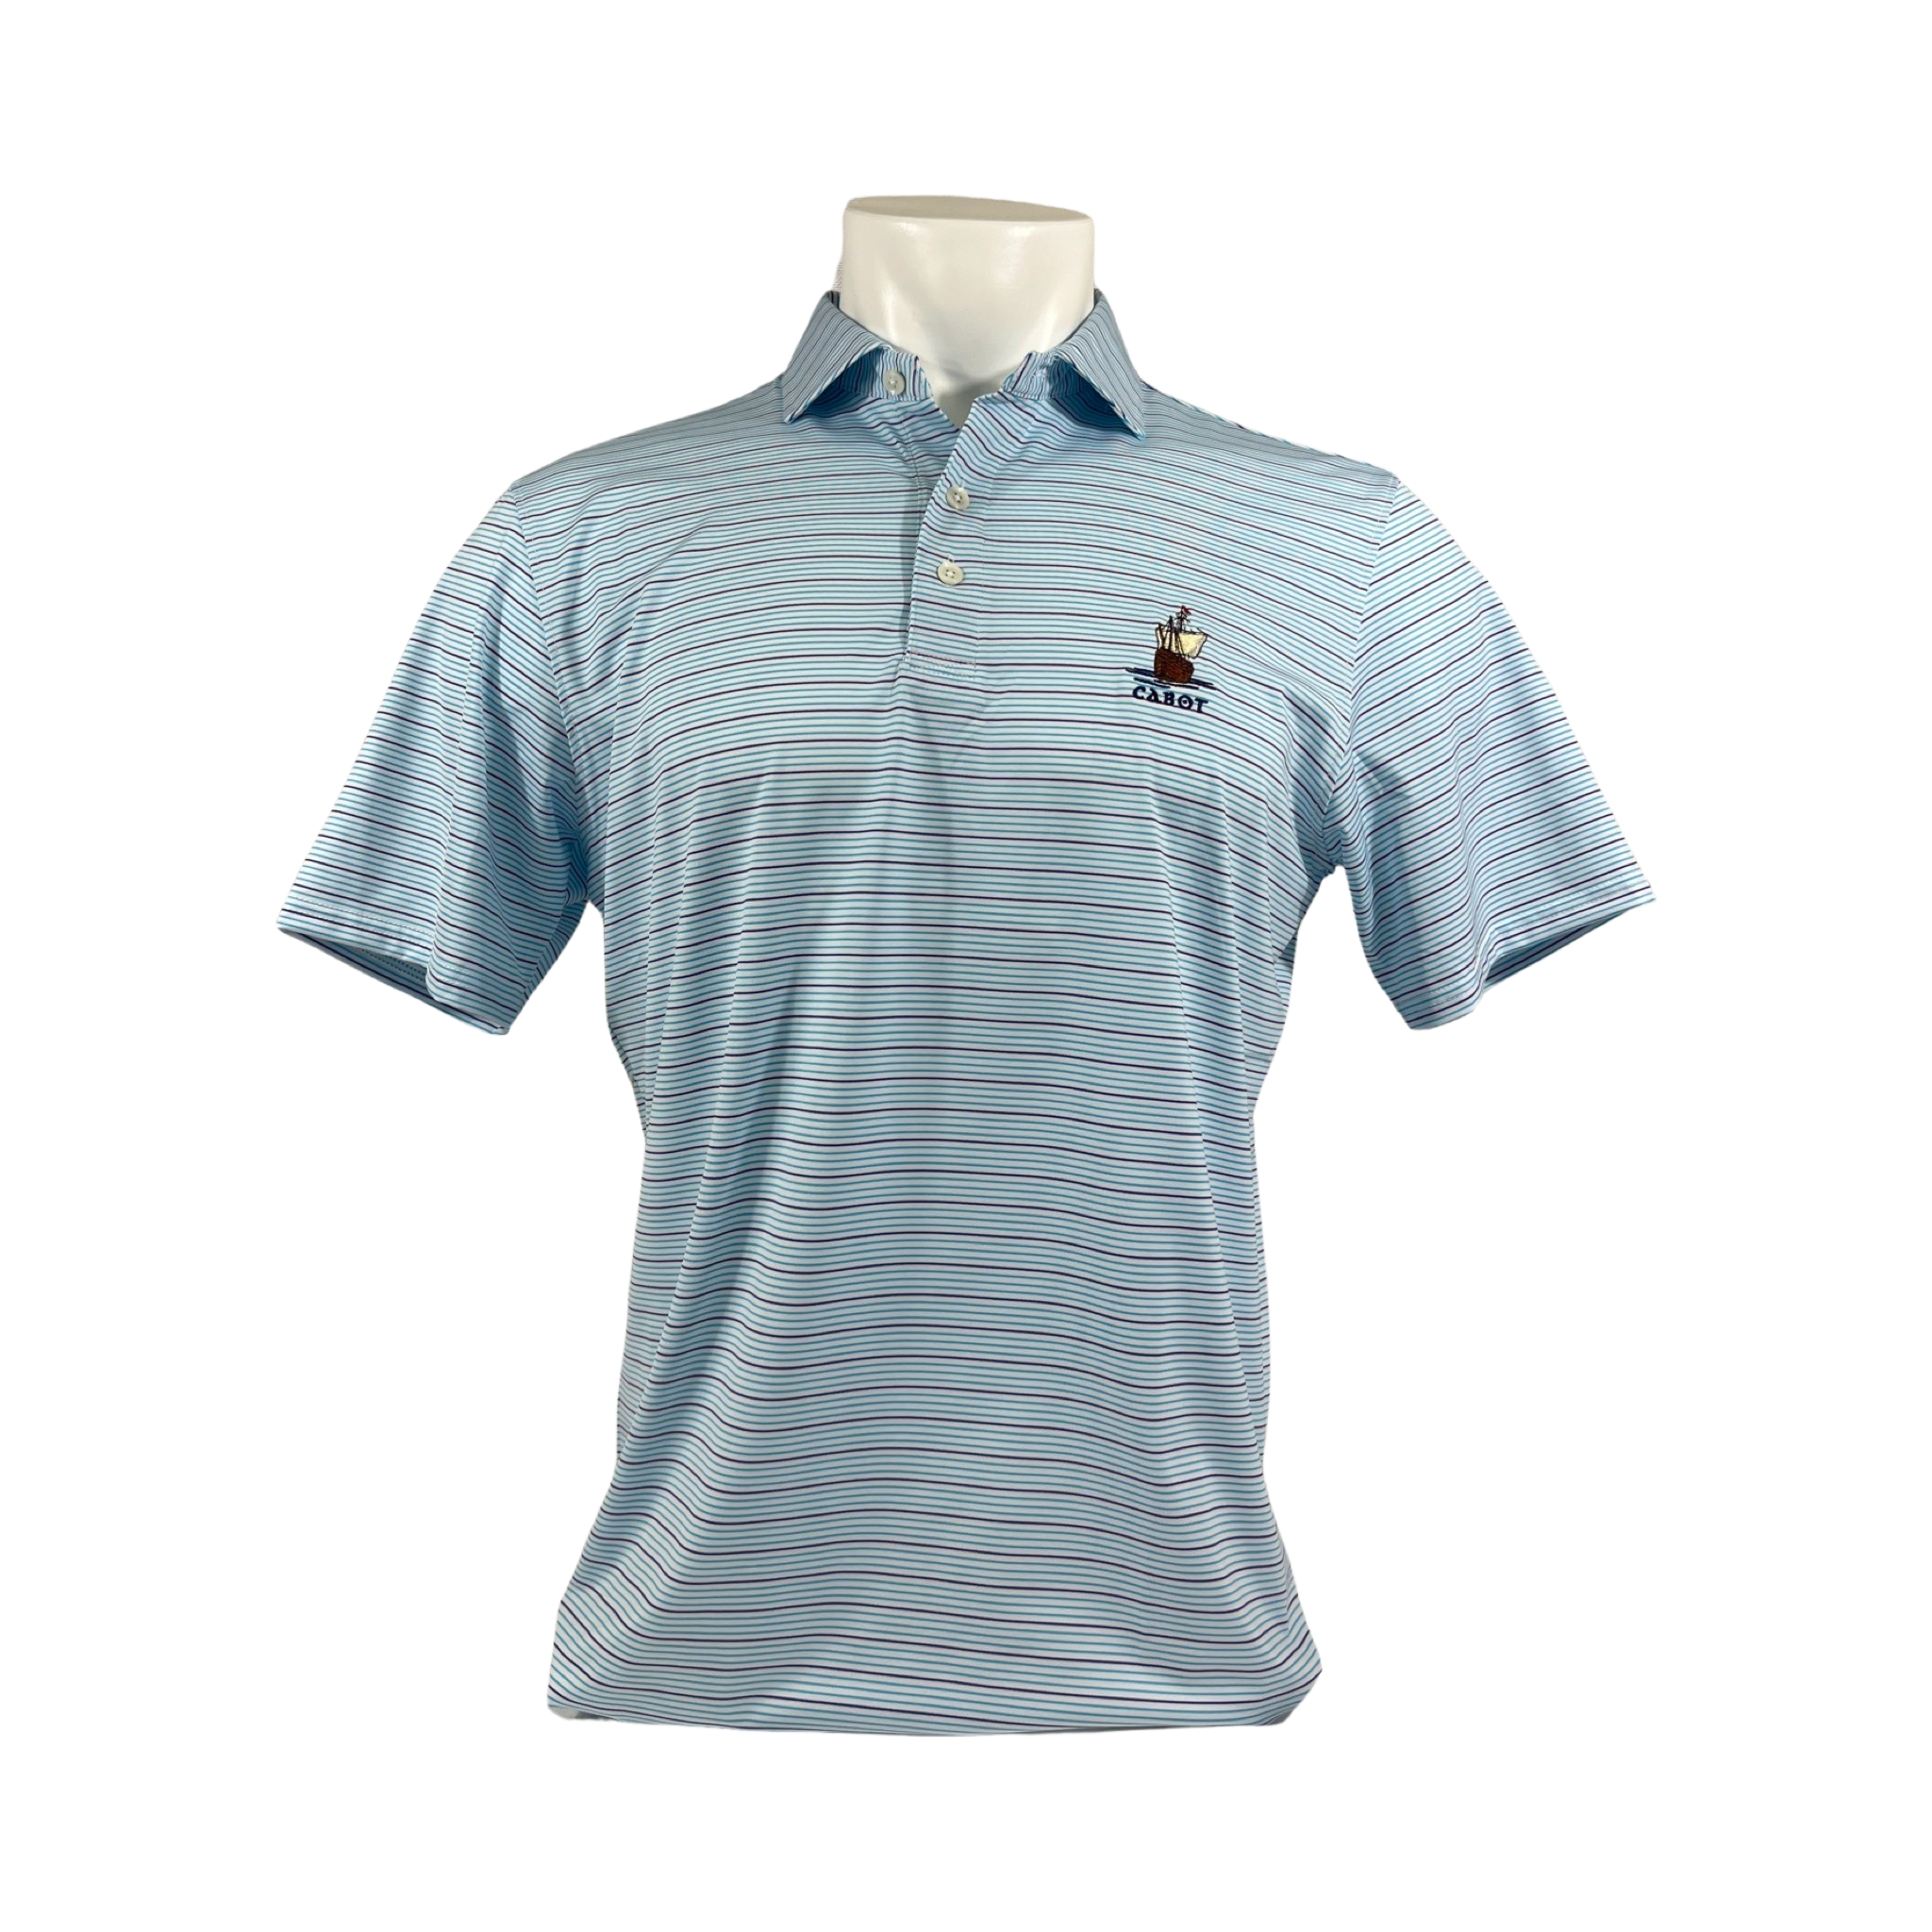 Holderness and Bourne Cabot Links 'The Sands' Polo